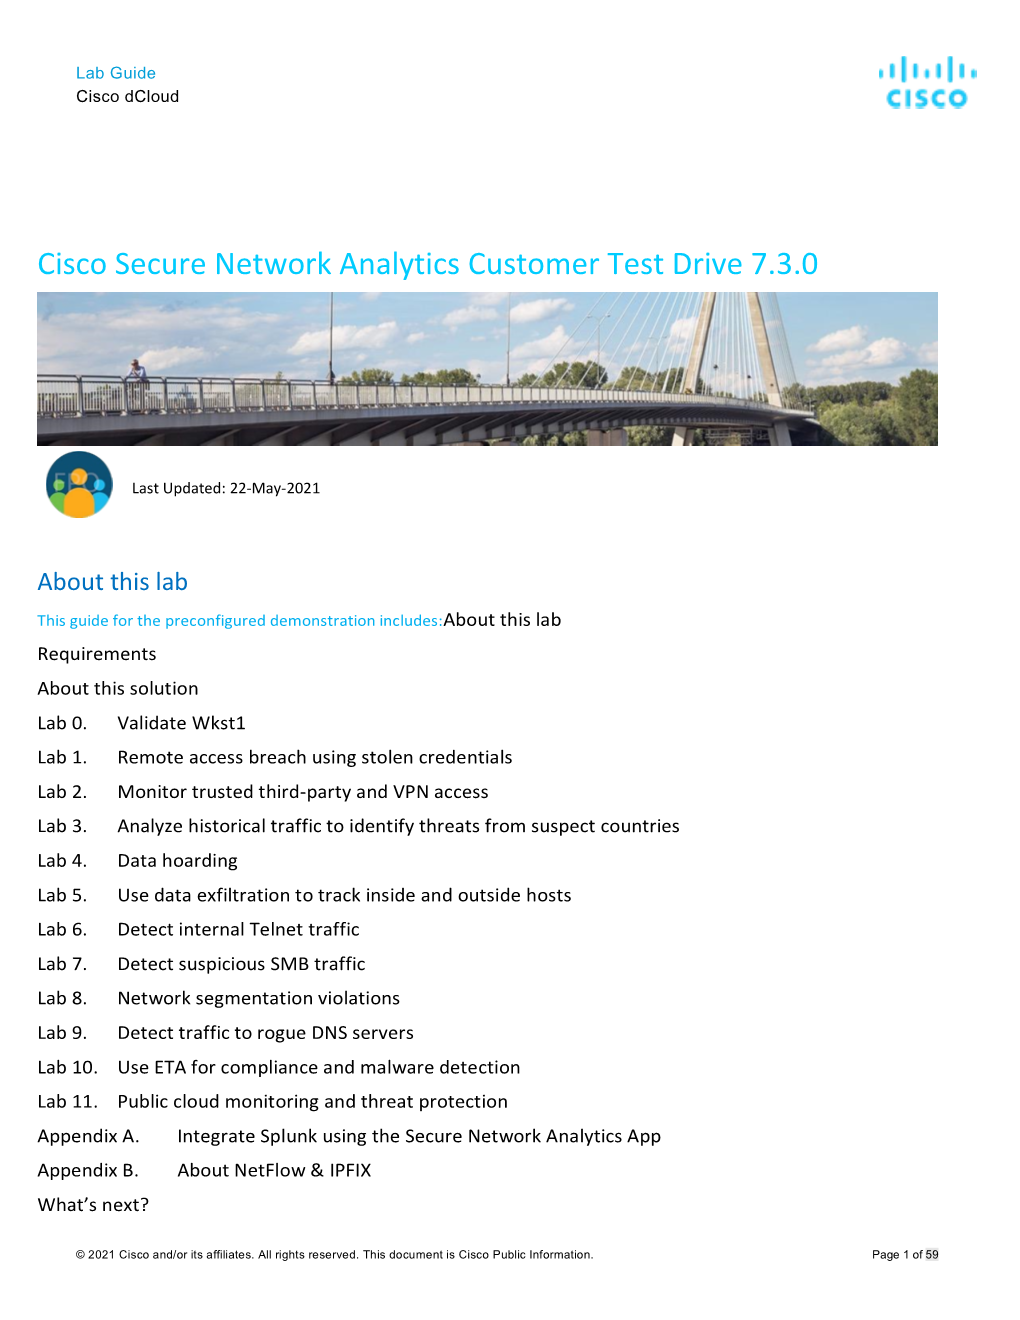 Secure Network Analytics Test Drive Lab Guide